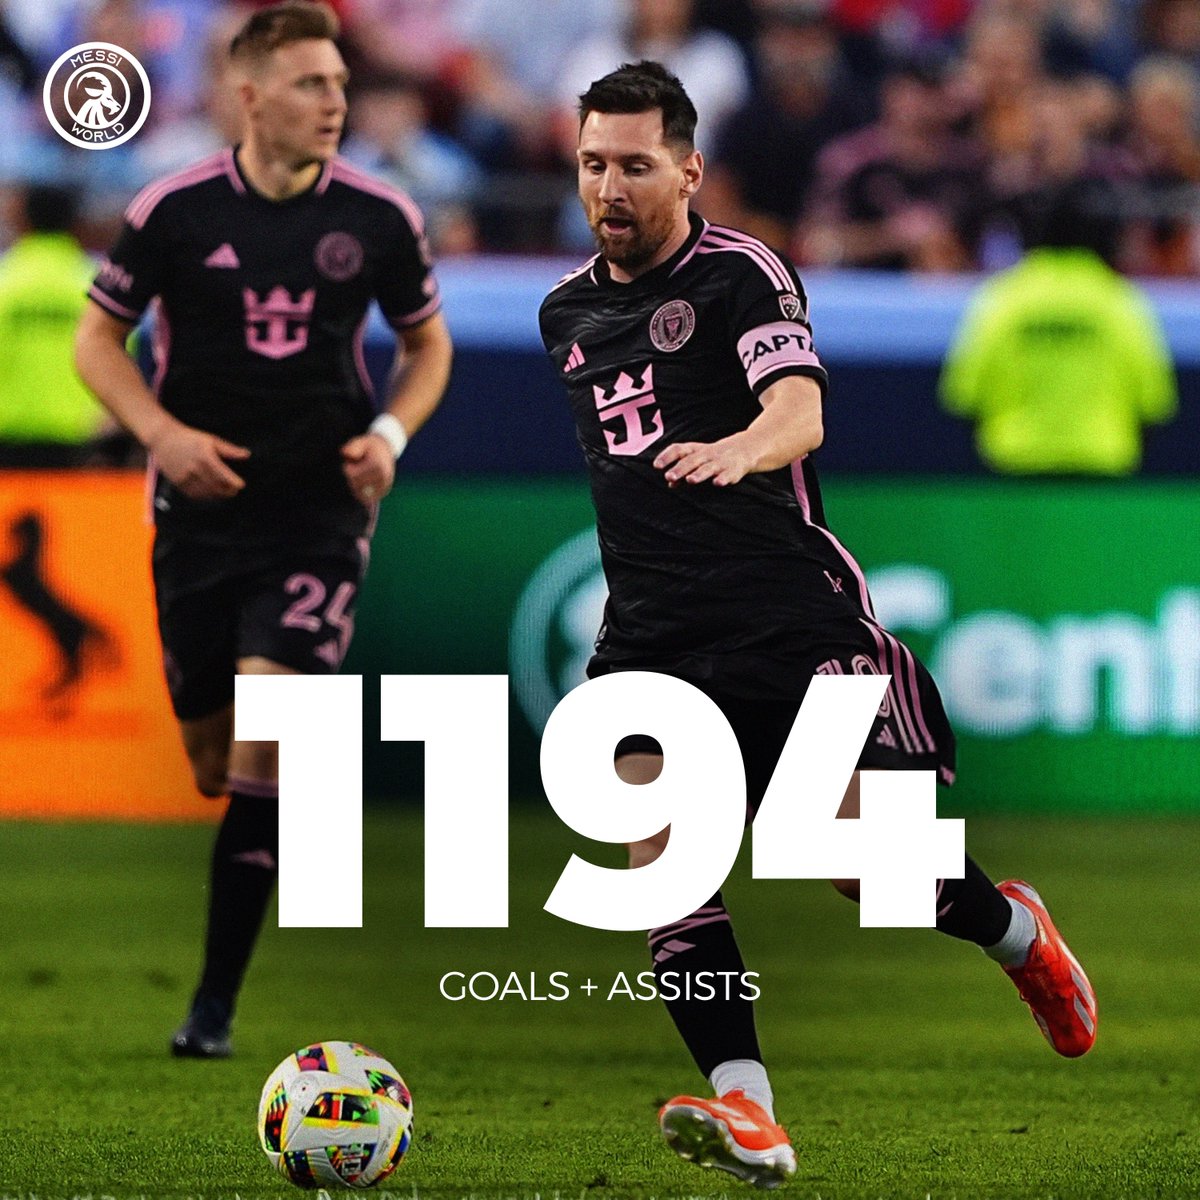 1194 Goal contributions is INSANE 🤯🤯🤯